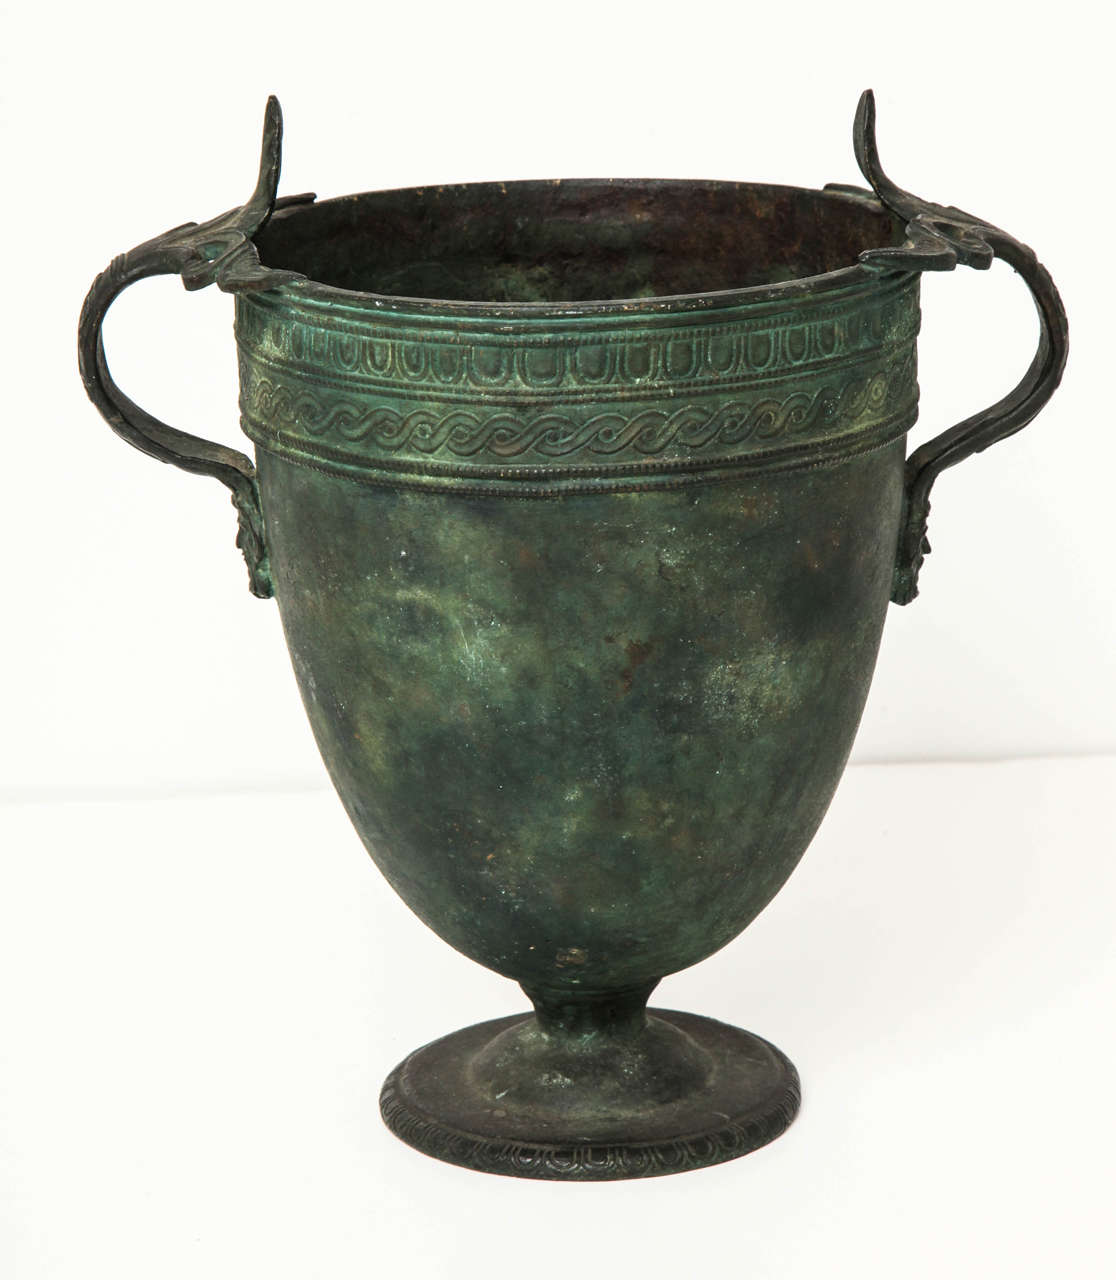 A 19th century Italian bronze vase after The Antique
Naples, circa 1870, probably Fonderia Chiurazzi

Decorated with banded egg-and-dart and Vitruvian scroll patterns with foliate acanthus-leaf handles terminating in bearded masks. A Grand Tour